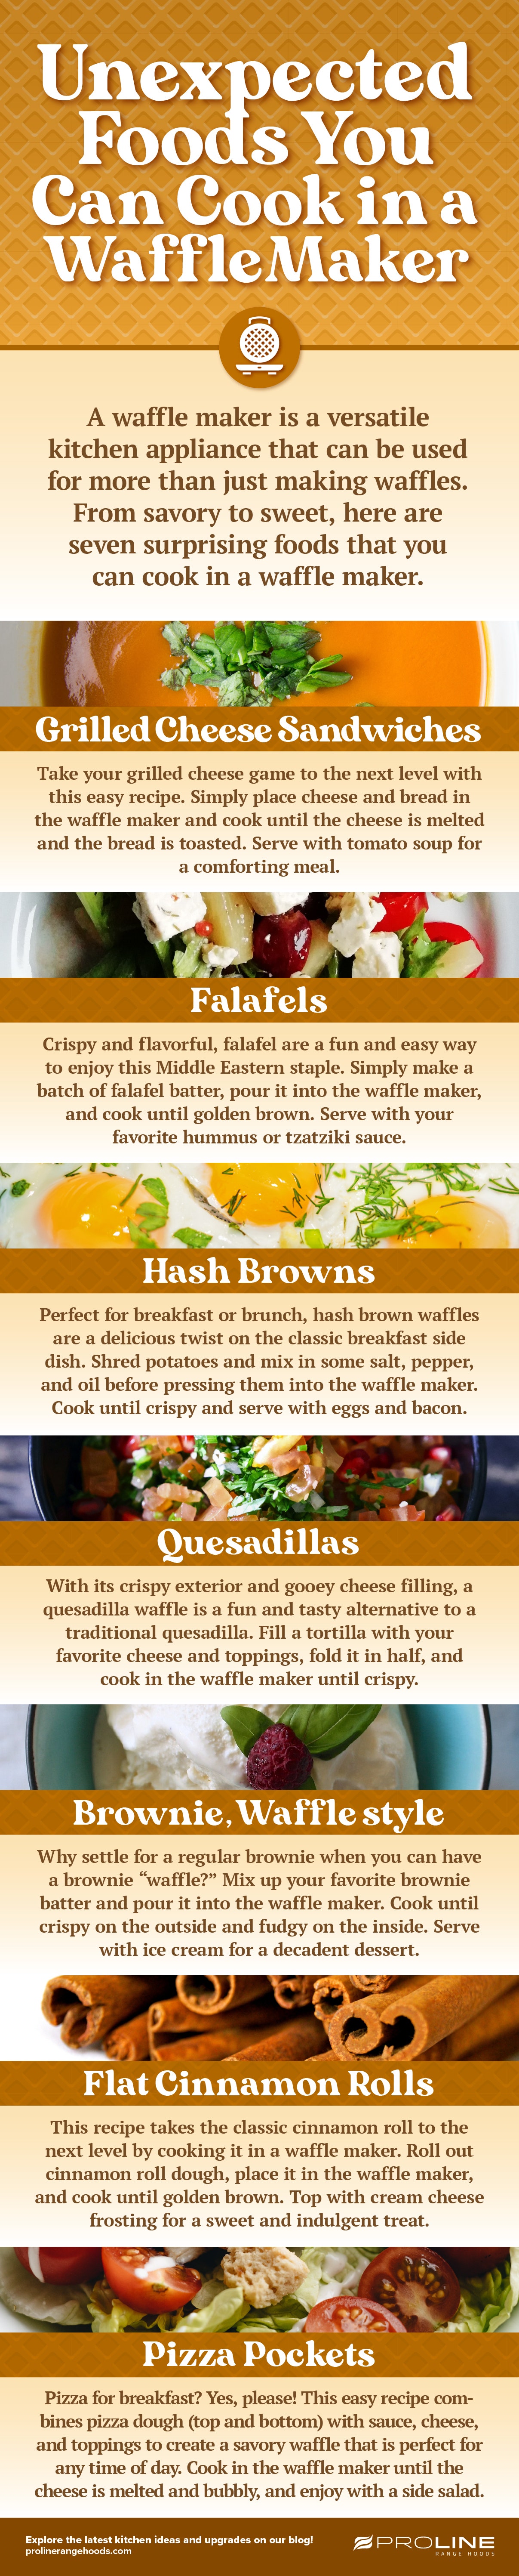 Infographic - Surprising foods you can cook in a waffle maker